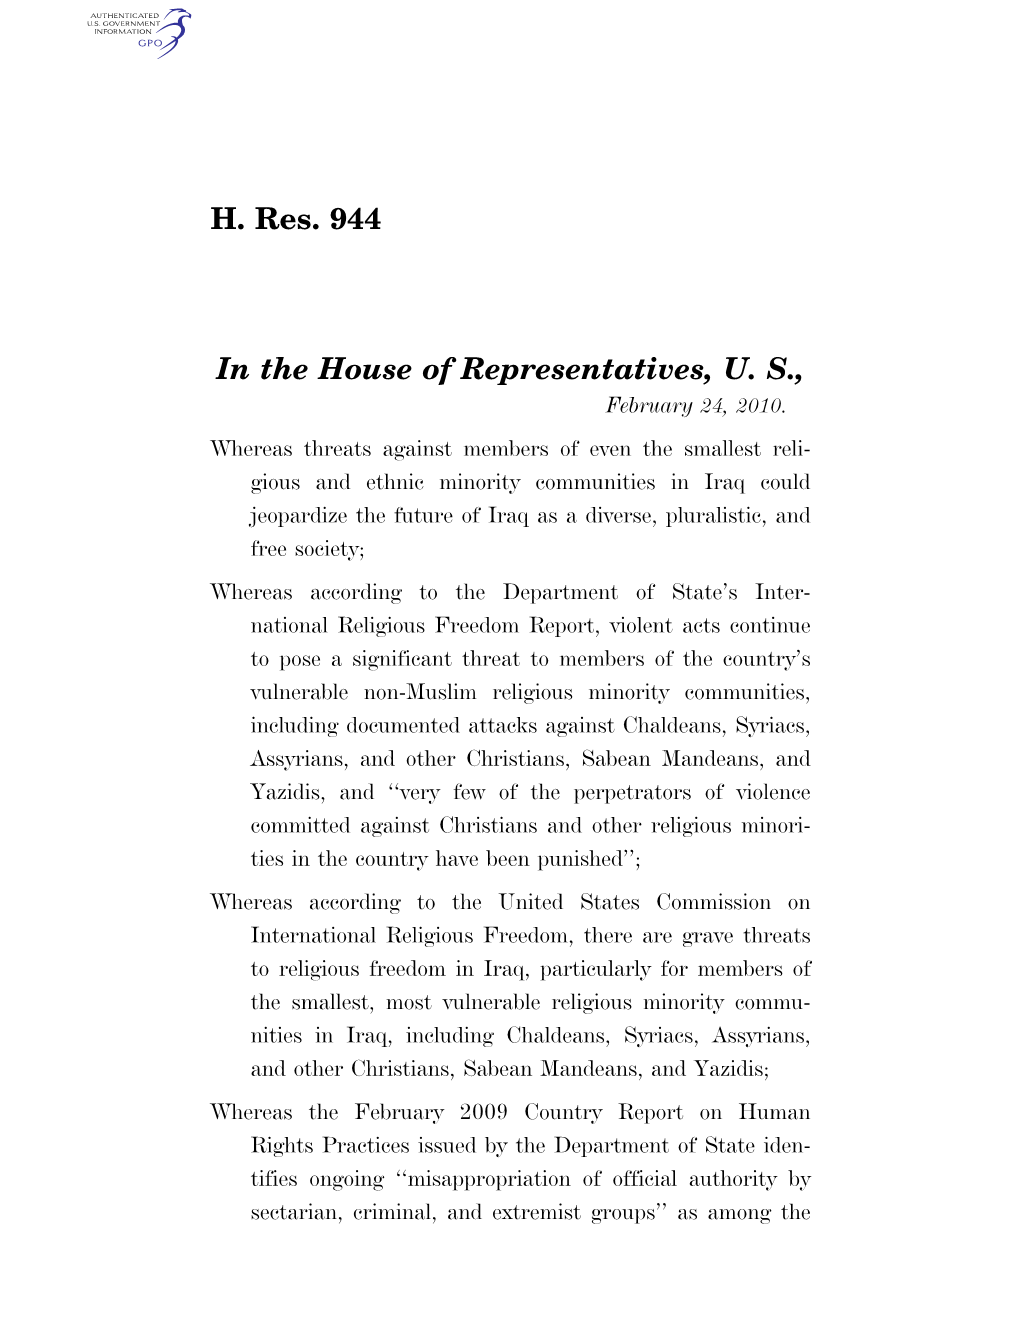 H. Res. 944 in the House of Representatives, U